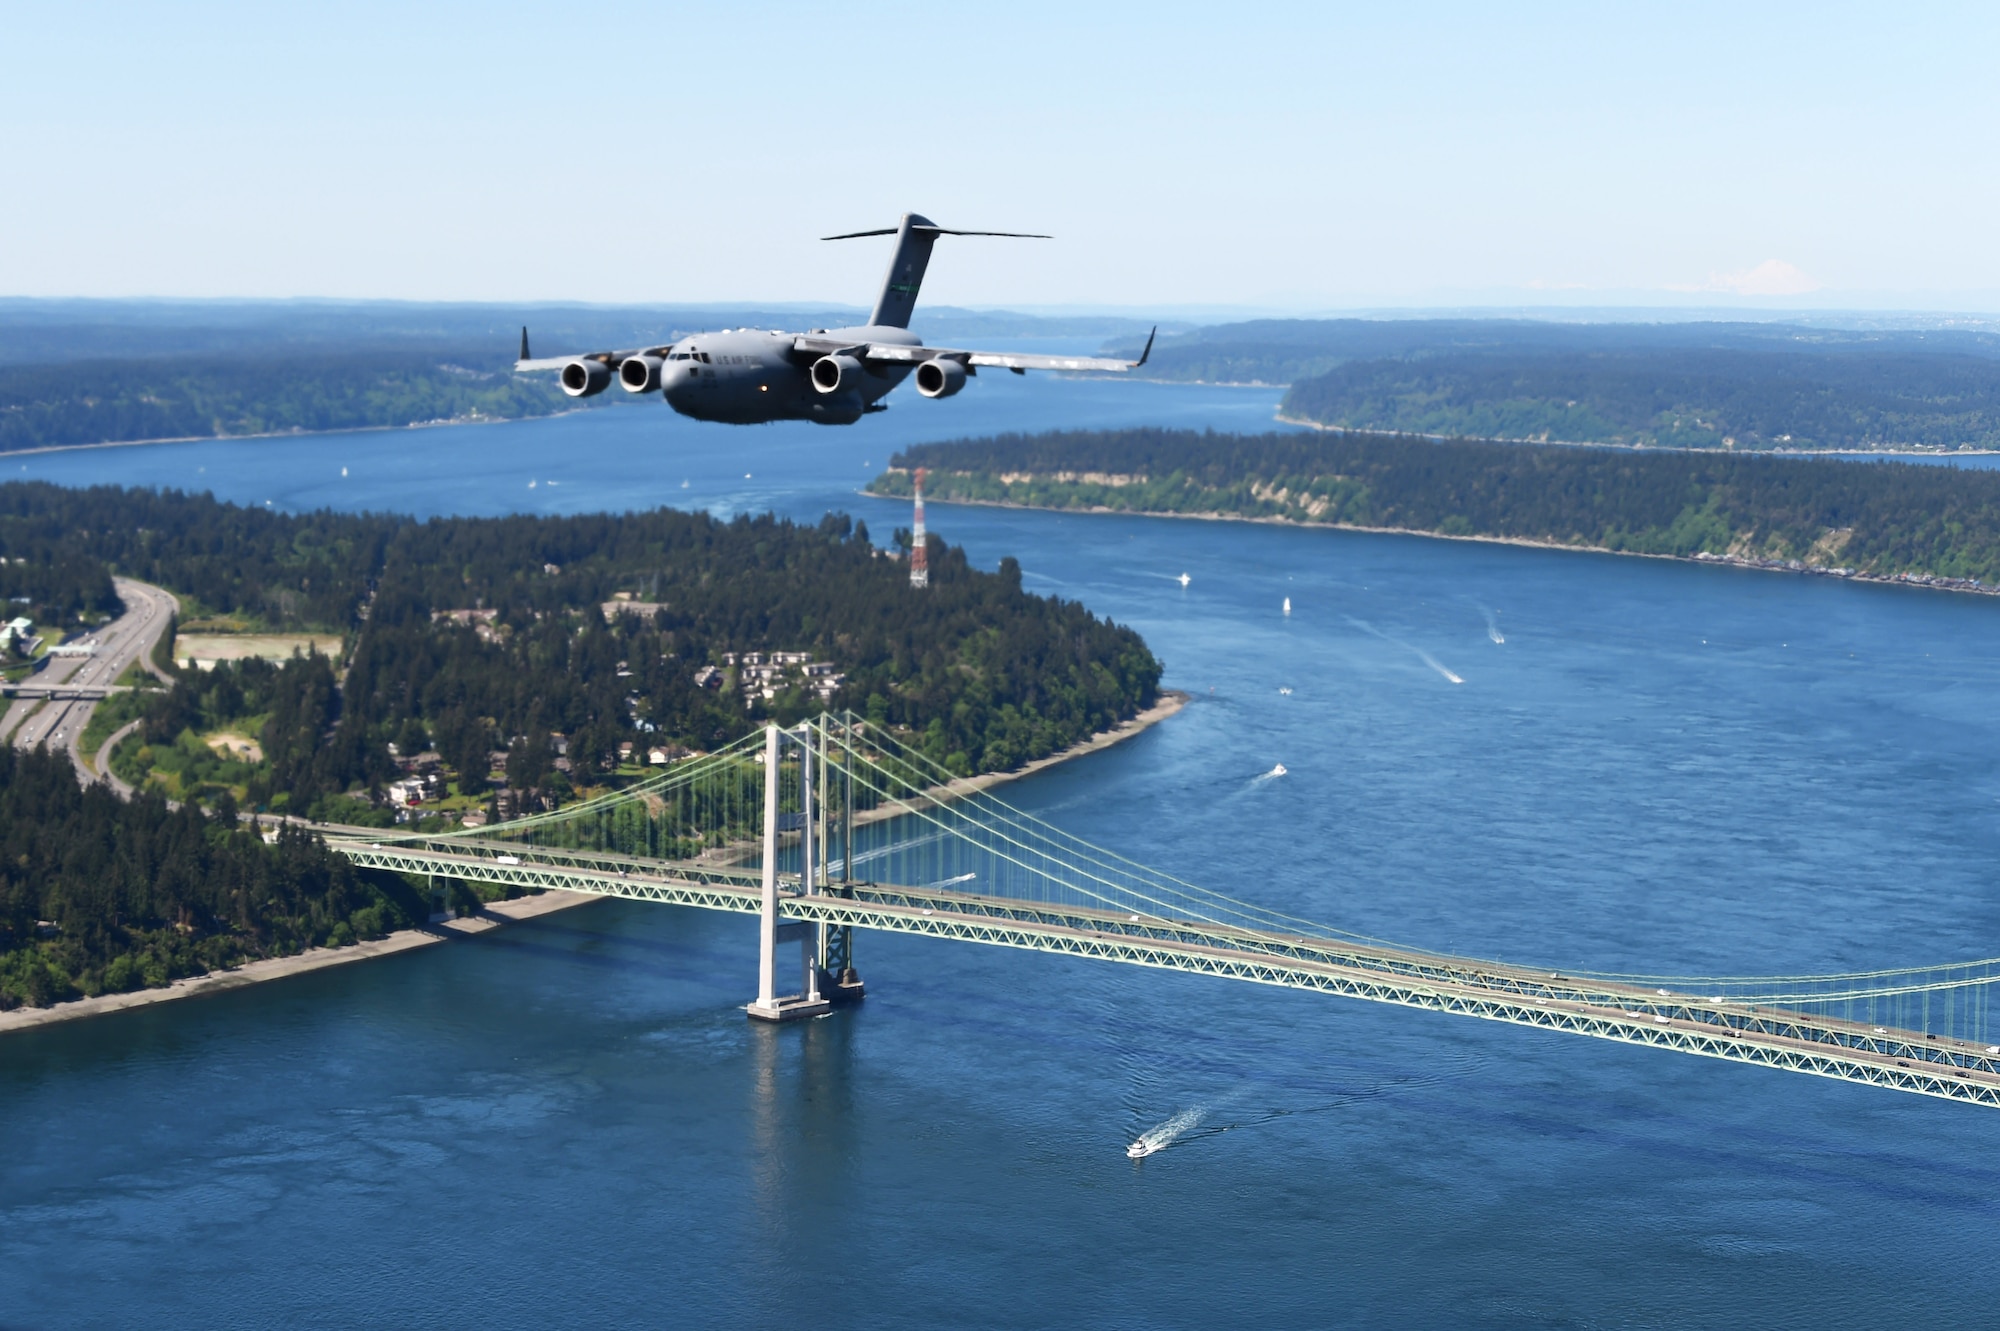 A C-17 Globemaster III from Joint Base Lewis-McChord, Wash., flies over the Tacoma Narrows Bridge in Tacoma, Wash., May 8, 2020. The 62nd Airlift Wing C-17 Demonstartion Team, made up of pilots and loadmasters from the 4th, 7th, and 8th Airlift Squadrons, conducted a flyover of nearly 45 hospitals, healthcare, organizations and landmarks up and down the Puget Sound, in appreciation of those working during the COVID-19 pandemic. (U.S. Air Force photo by Airman 1st Class Mikayla Heineck)